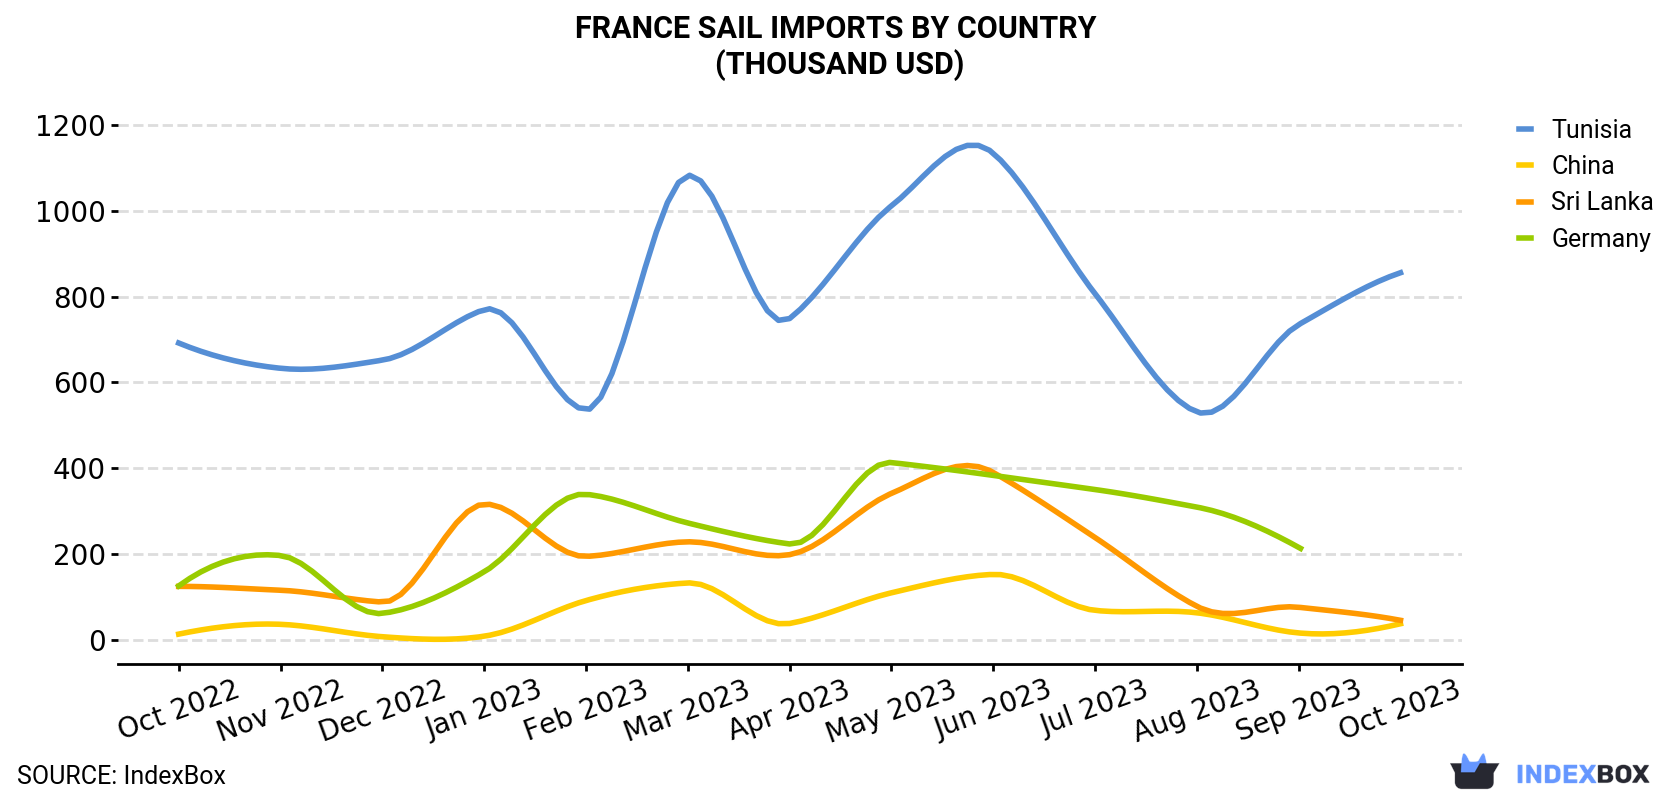 France Sail Imports By Country (Thousand USD)